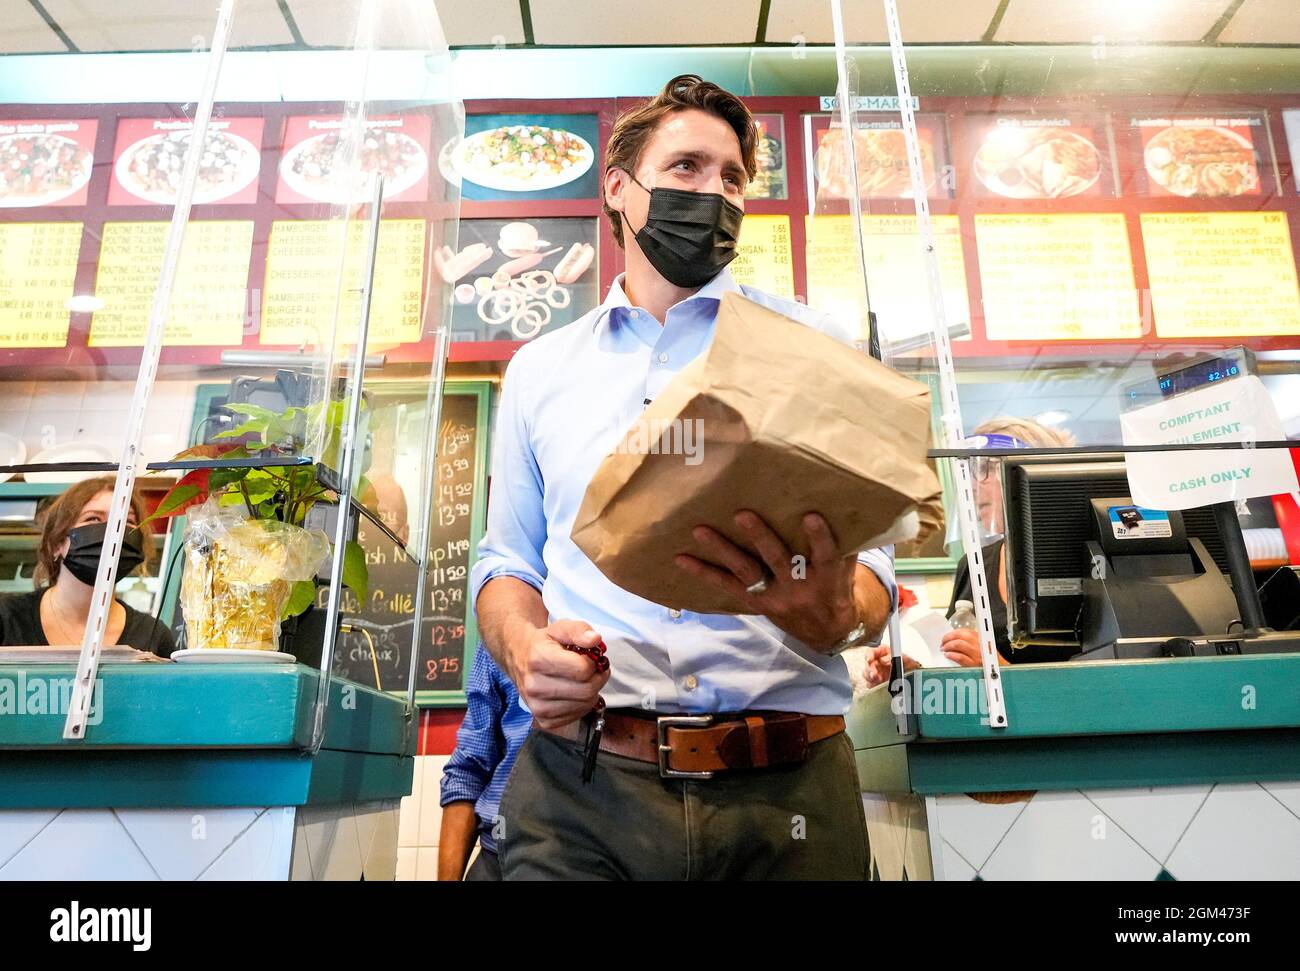 Canada's Liberal Prime Minister Justin Trudeau buys food at an election campaign stop in Blainville, Quebec, Canada September 16, 2021. REUTERS/Carlos Osorio Stock Photo